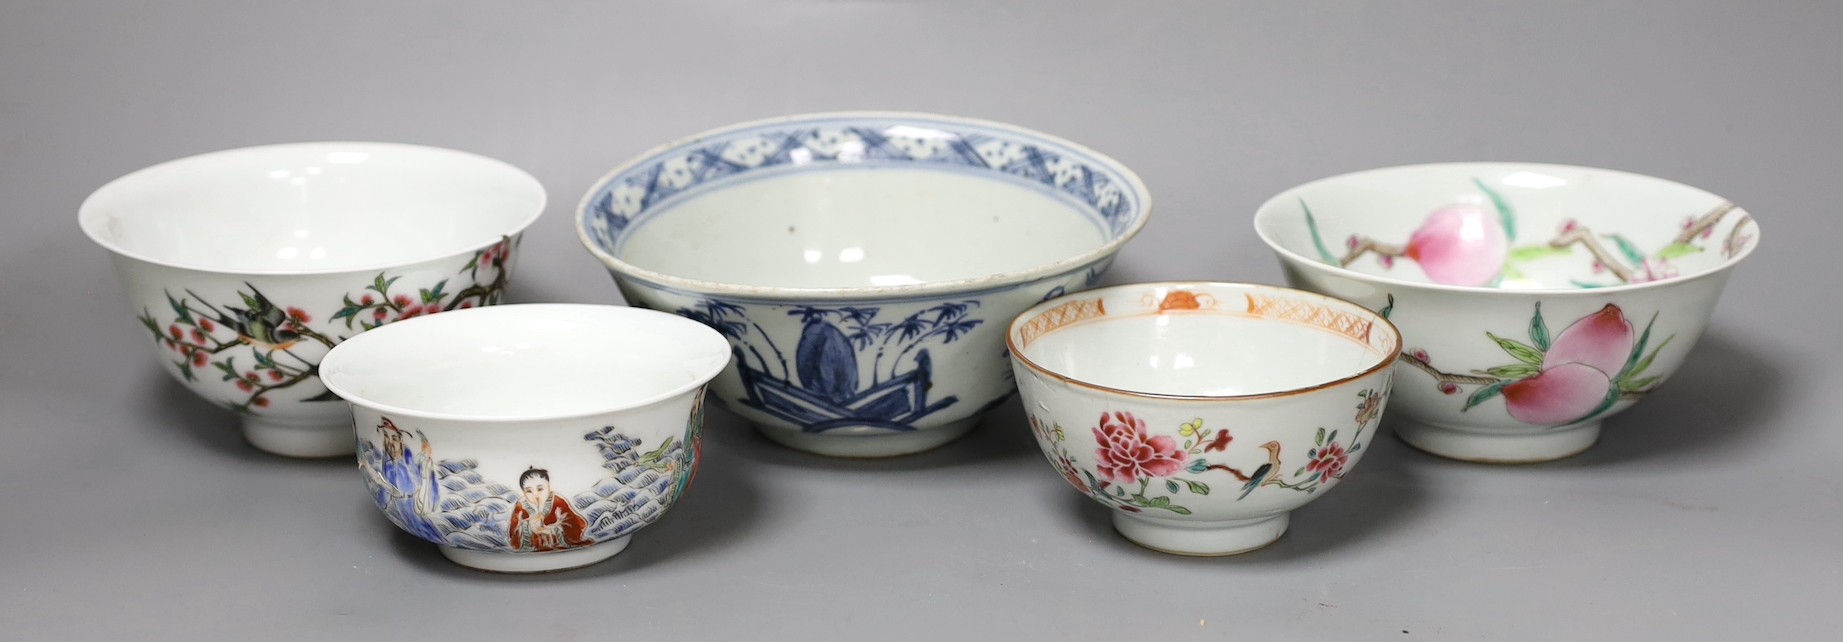 Five Chinese porcelain bowls, one blue and white and three with enamelled decoration, largest 18 cm diameter